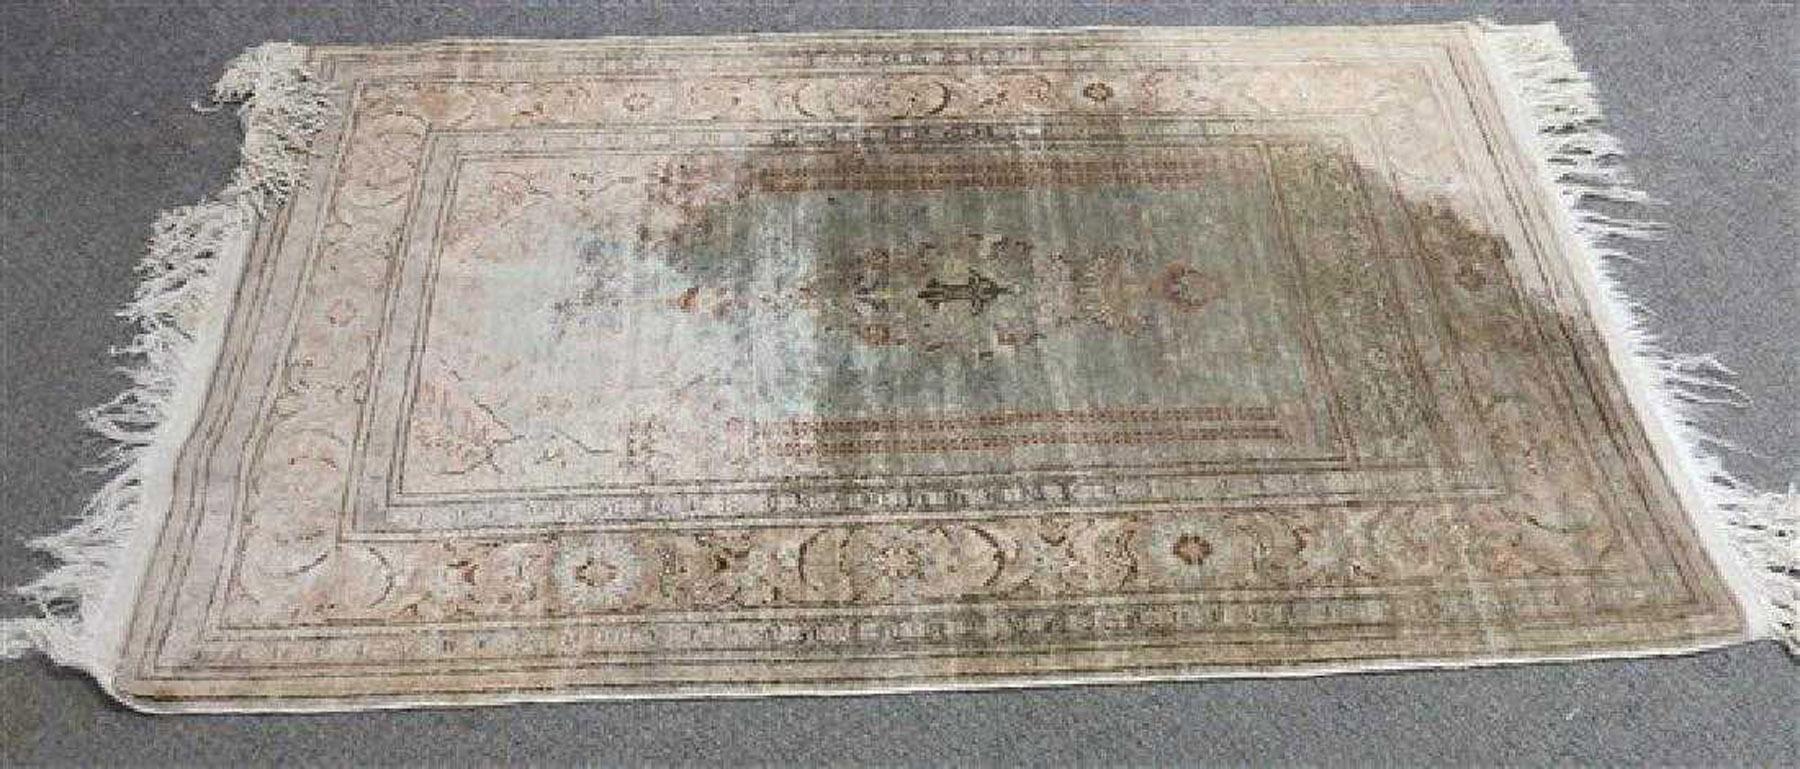 The antique wool scatter rug features a Mid-Eastern columned archway in the centre with a lantern and other motives. The border is arranged with stylized leaves and flowers. Predominant colors are blue, greens and browns.
Partial missing fringe at